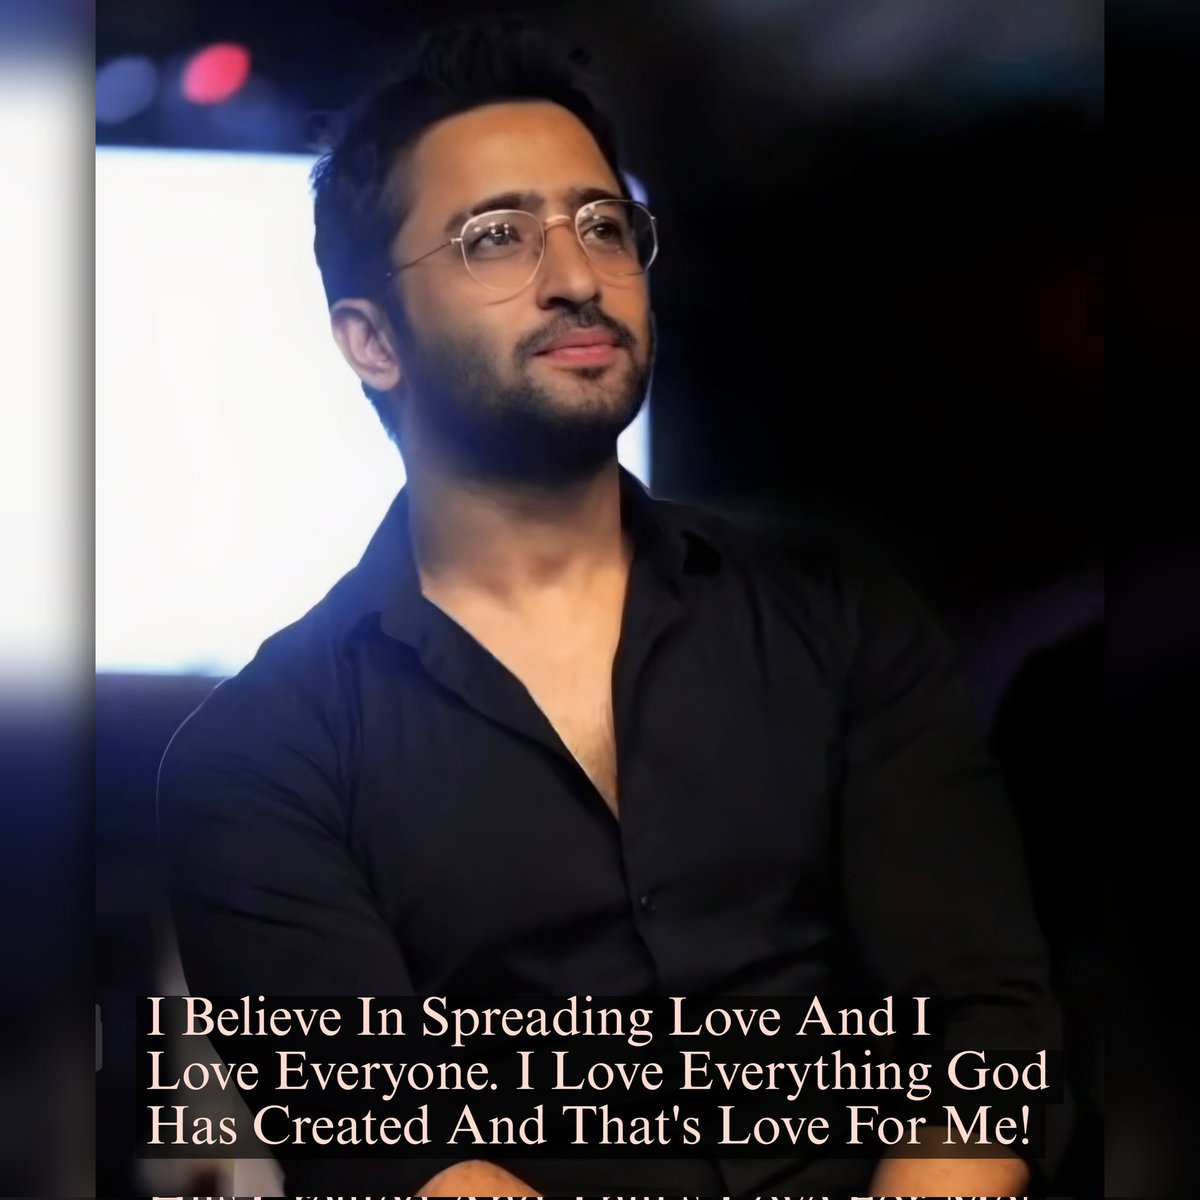 I Believe In Spreading Love And I Love Everyone. I Love Everything God Has Created And That's Love For Me! ~ Shaheer 💫 

#ShaheerSheikh #SSQuotes #ShaheerSayings #RiseNShine #StayHealthy #StayBlessed #LoveAndRespect

@Shaheer_S ♥️

#GodBlessYou #ShaheerSheikh